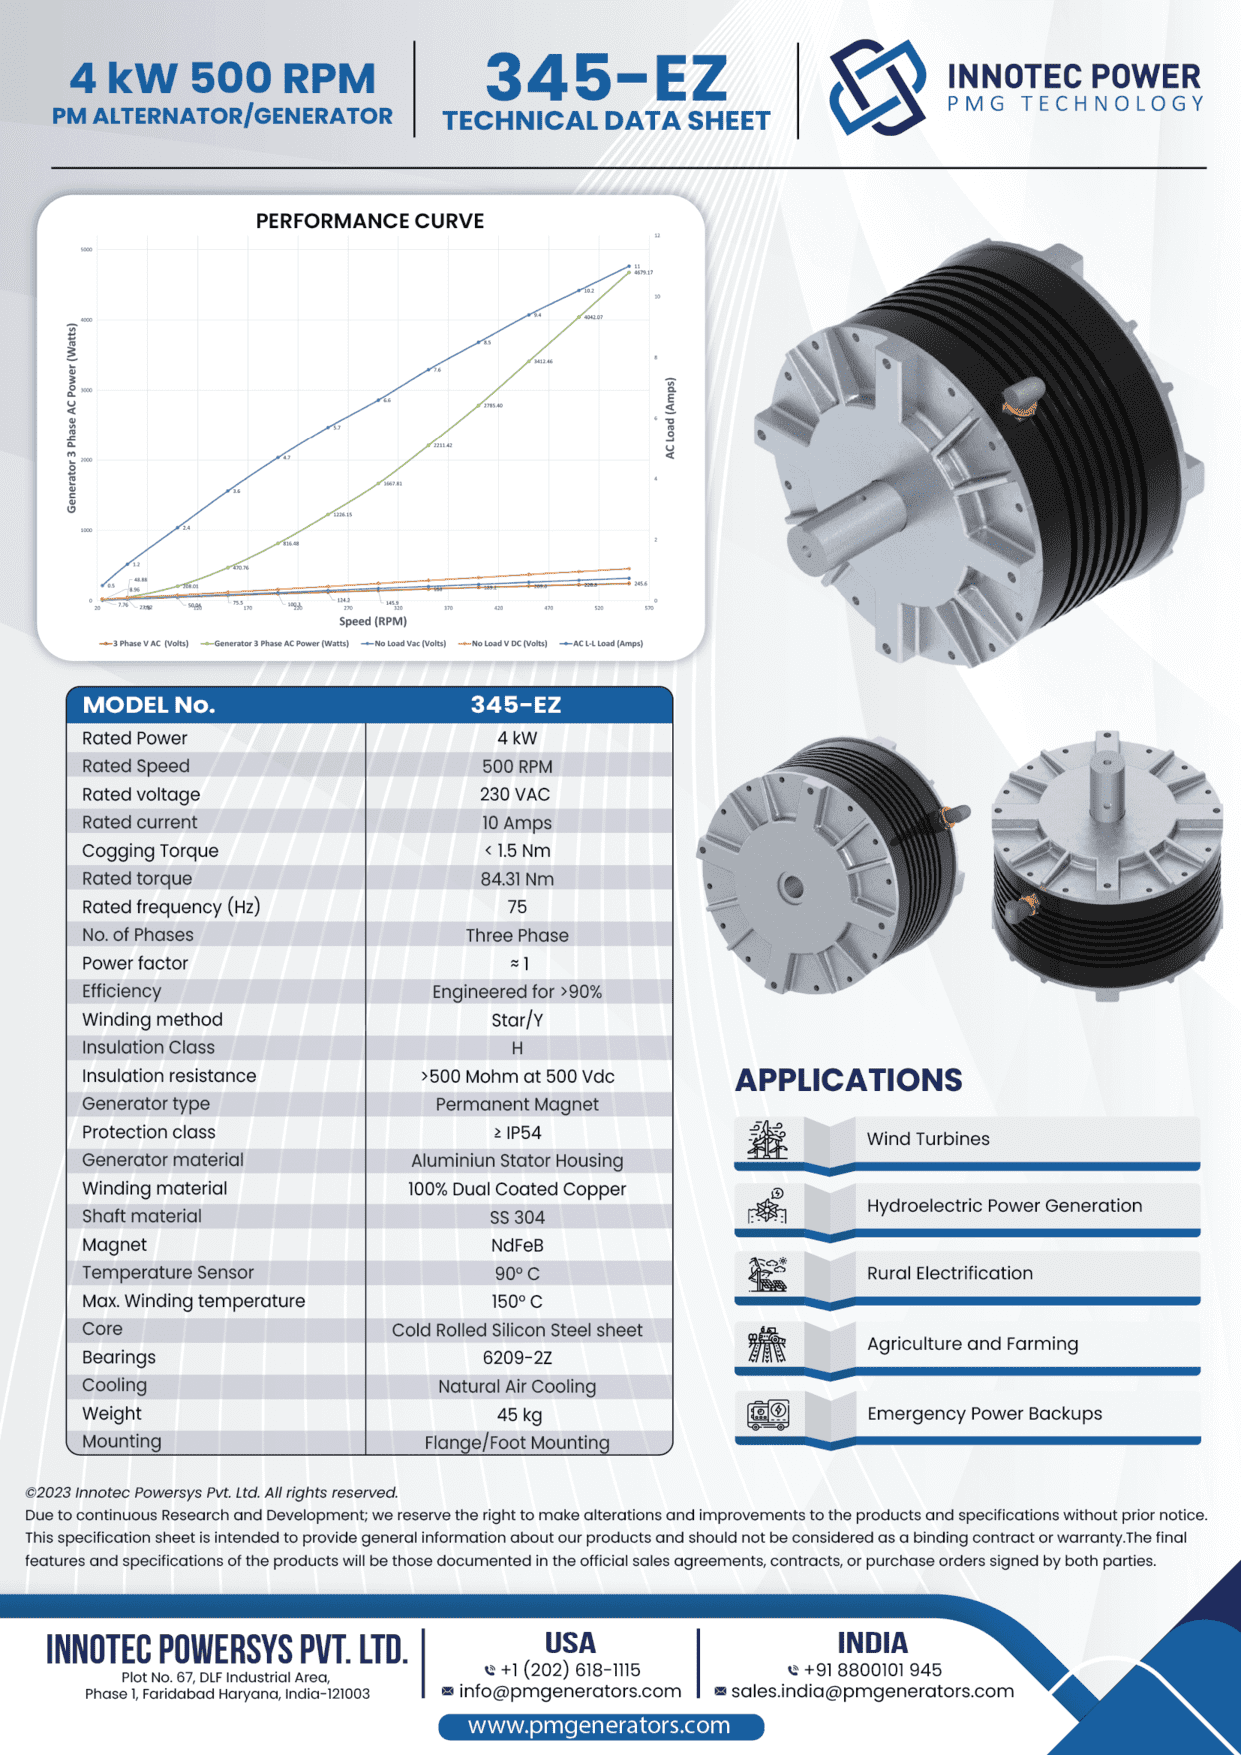 Data sheet of our 4kW Alternators for Wind Turbine applications at 500 RPM